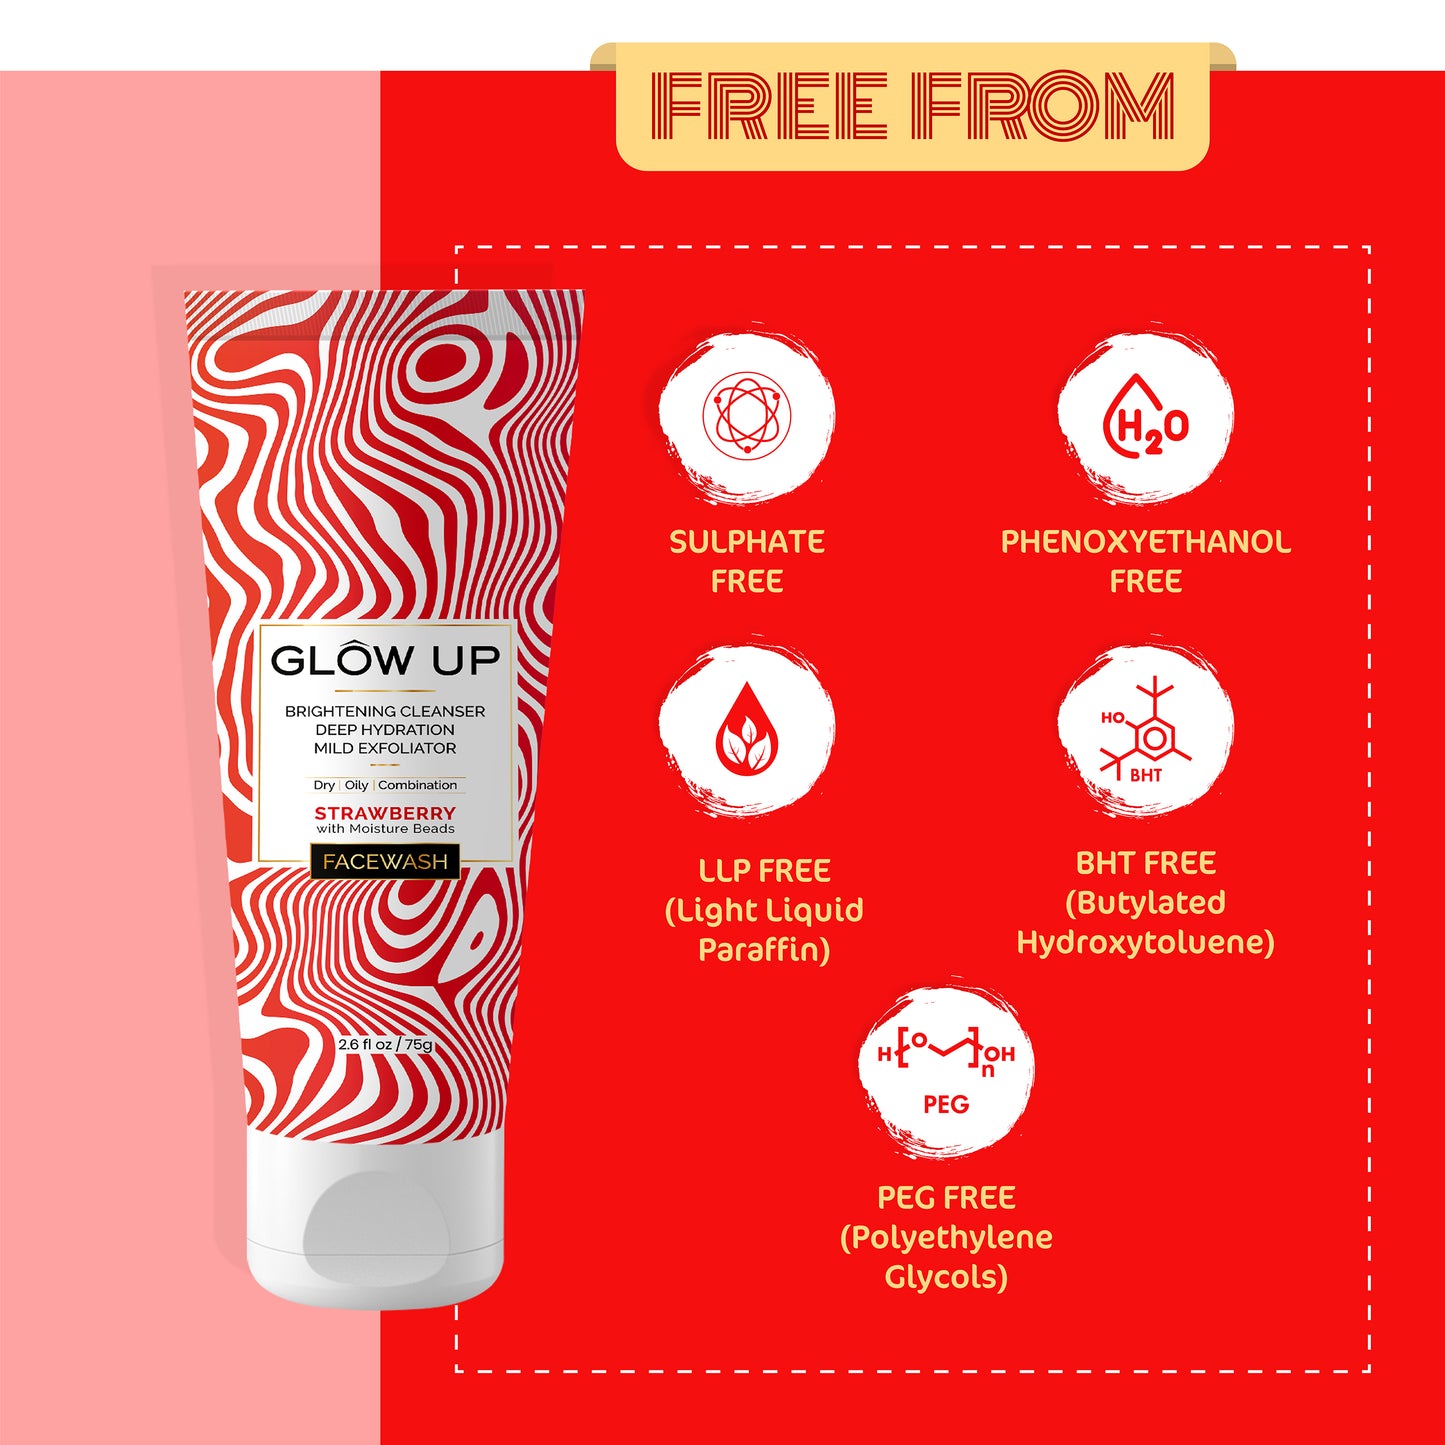 Free From glow up strawberry face wash